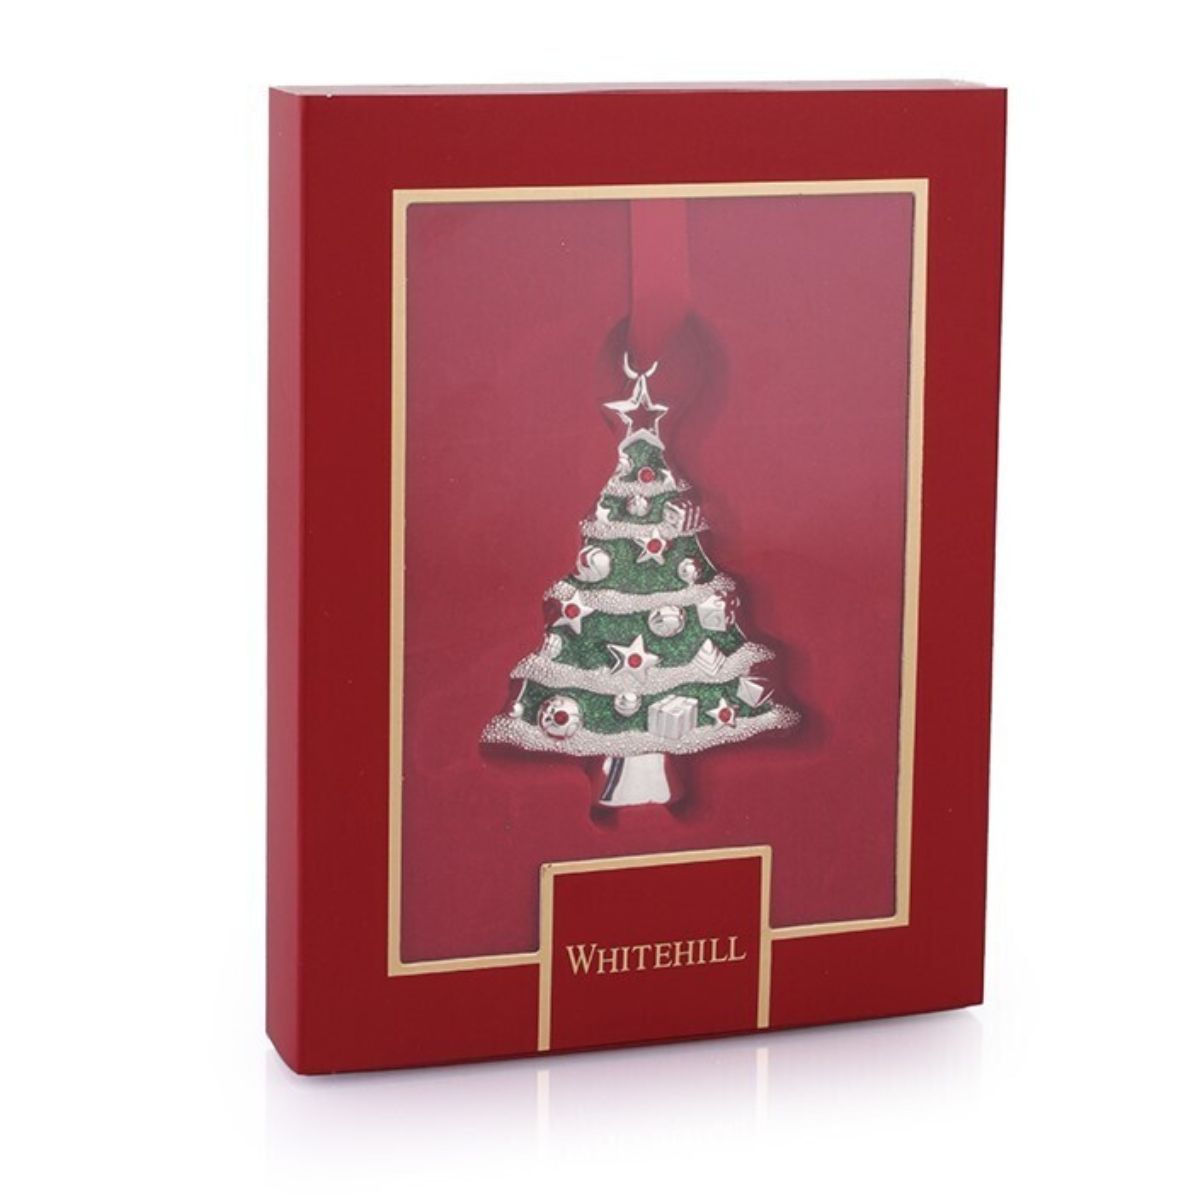 Whitehill Boxed Christmas Ornaments